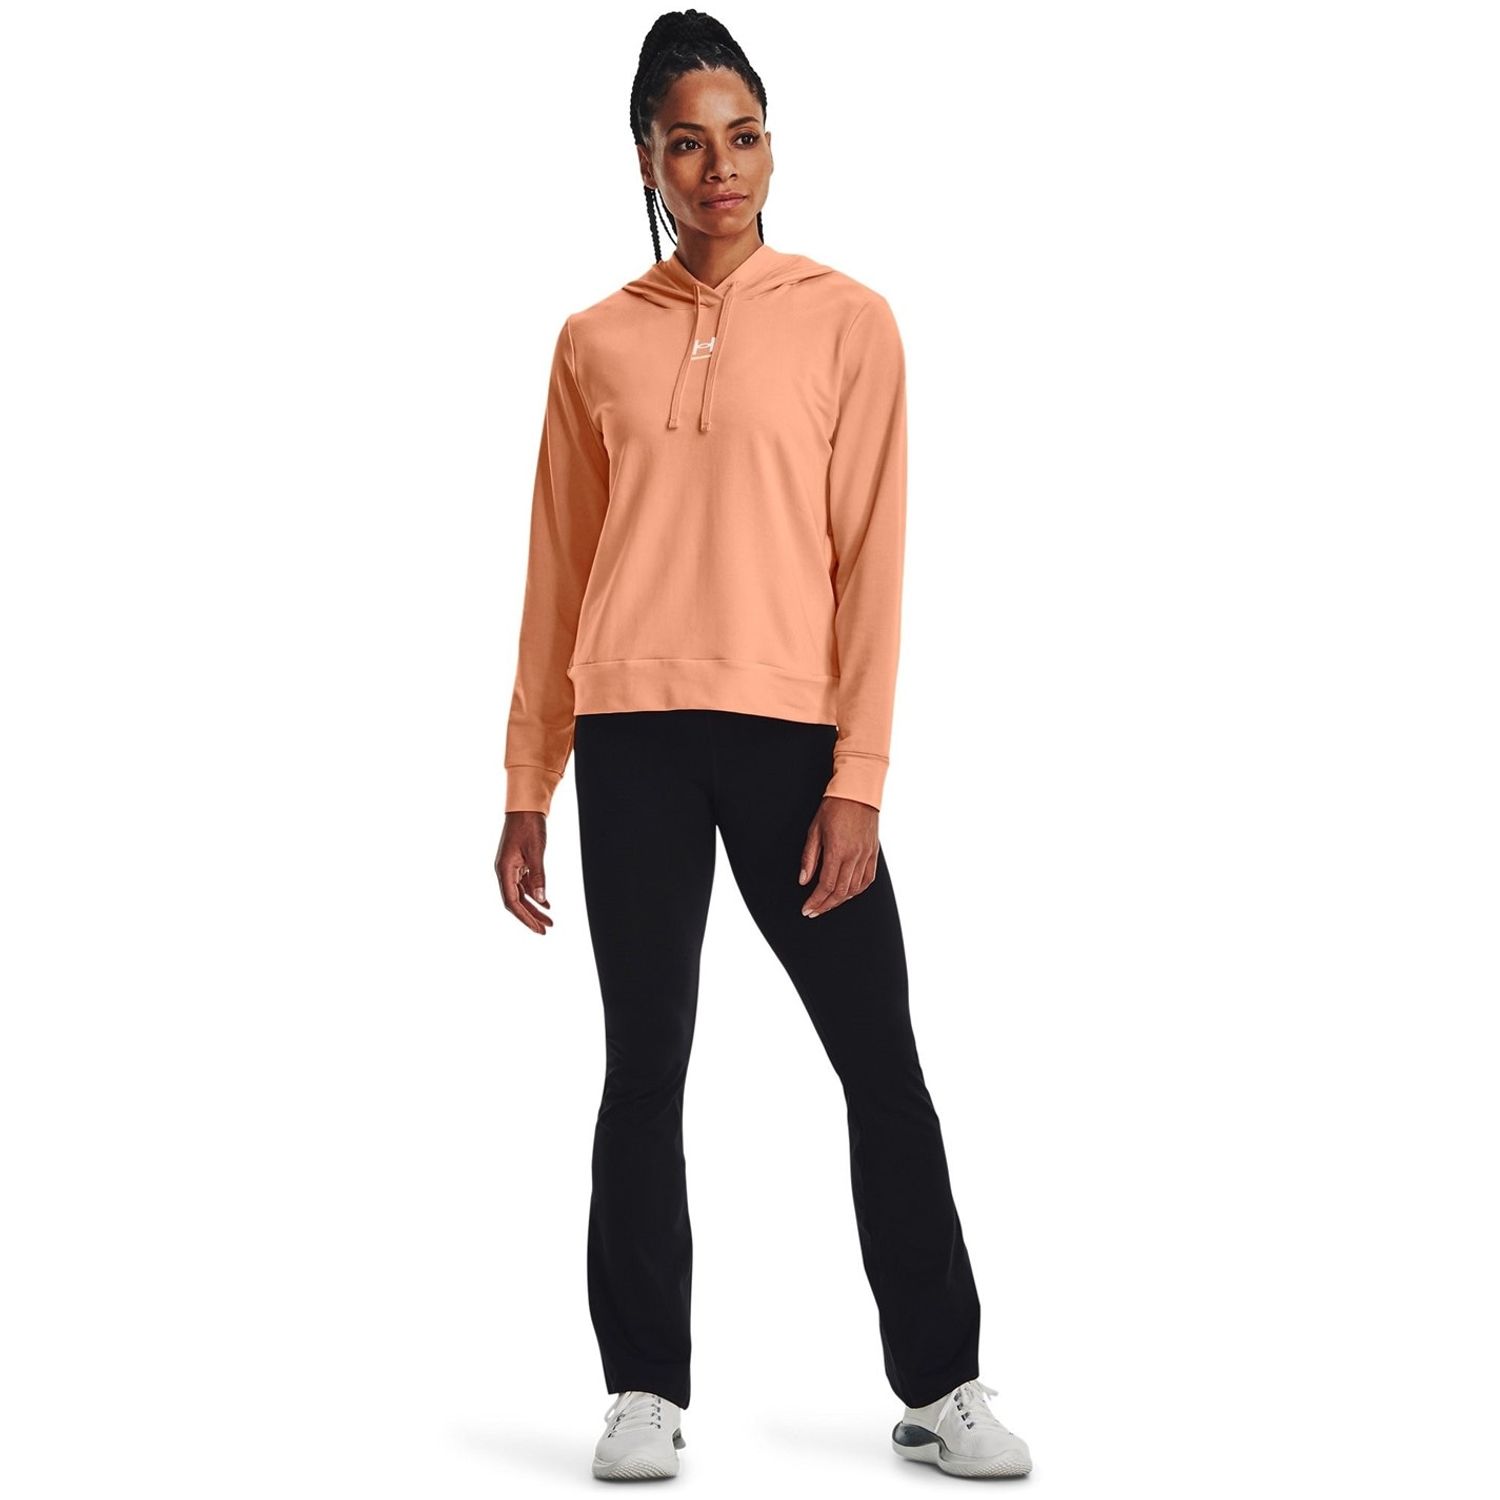 Orange Under Armour Armour Rival Terry OTH Hoodie Womens - Get The